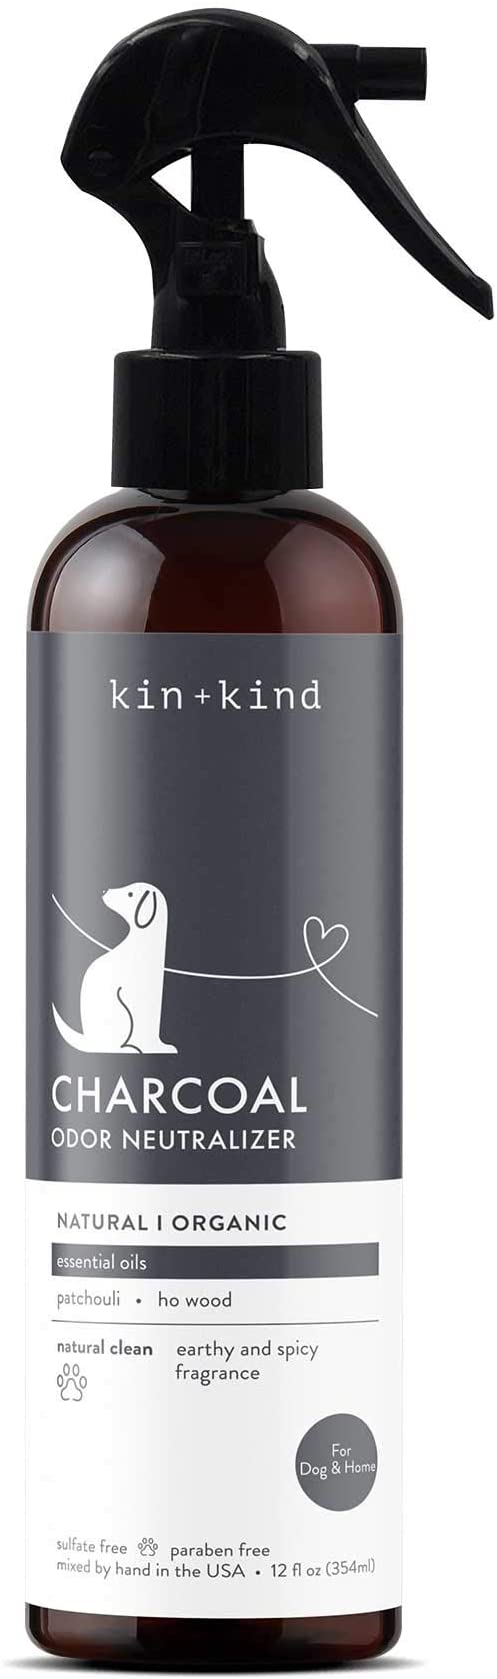 Kin+Kind - Deodorizing Spray (Charcoal) - Dashing Dawgs Grooming and Boutique 